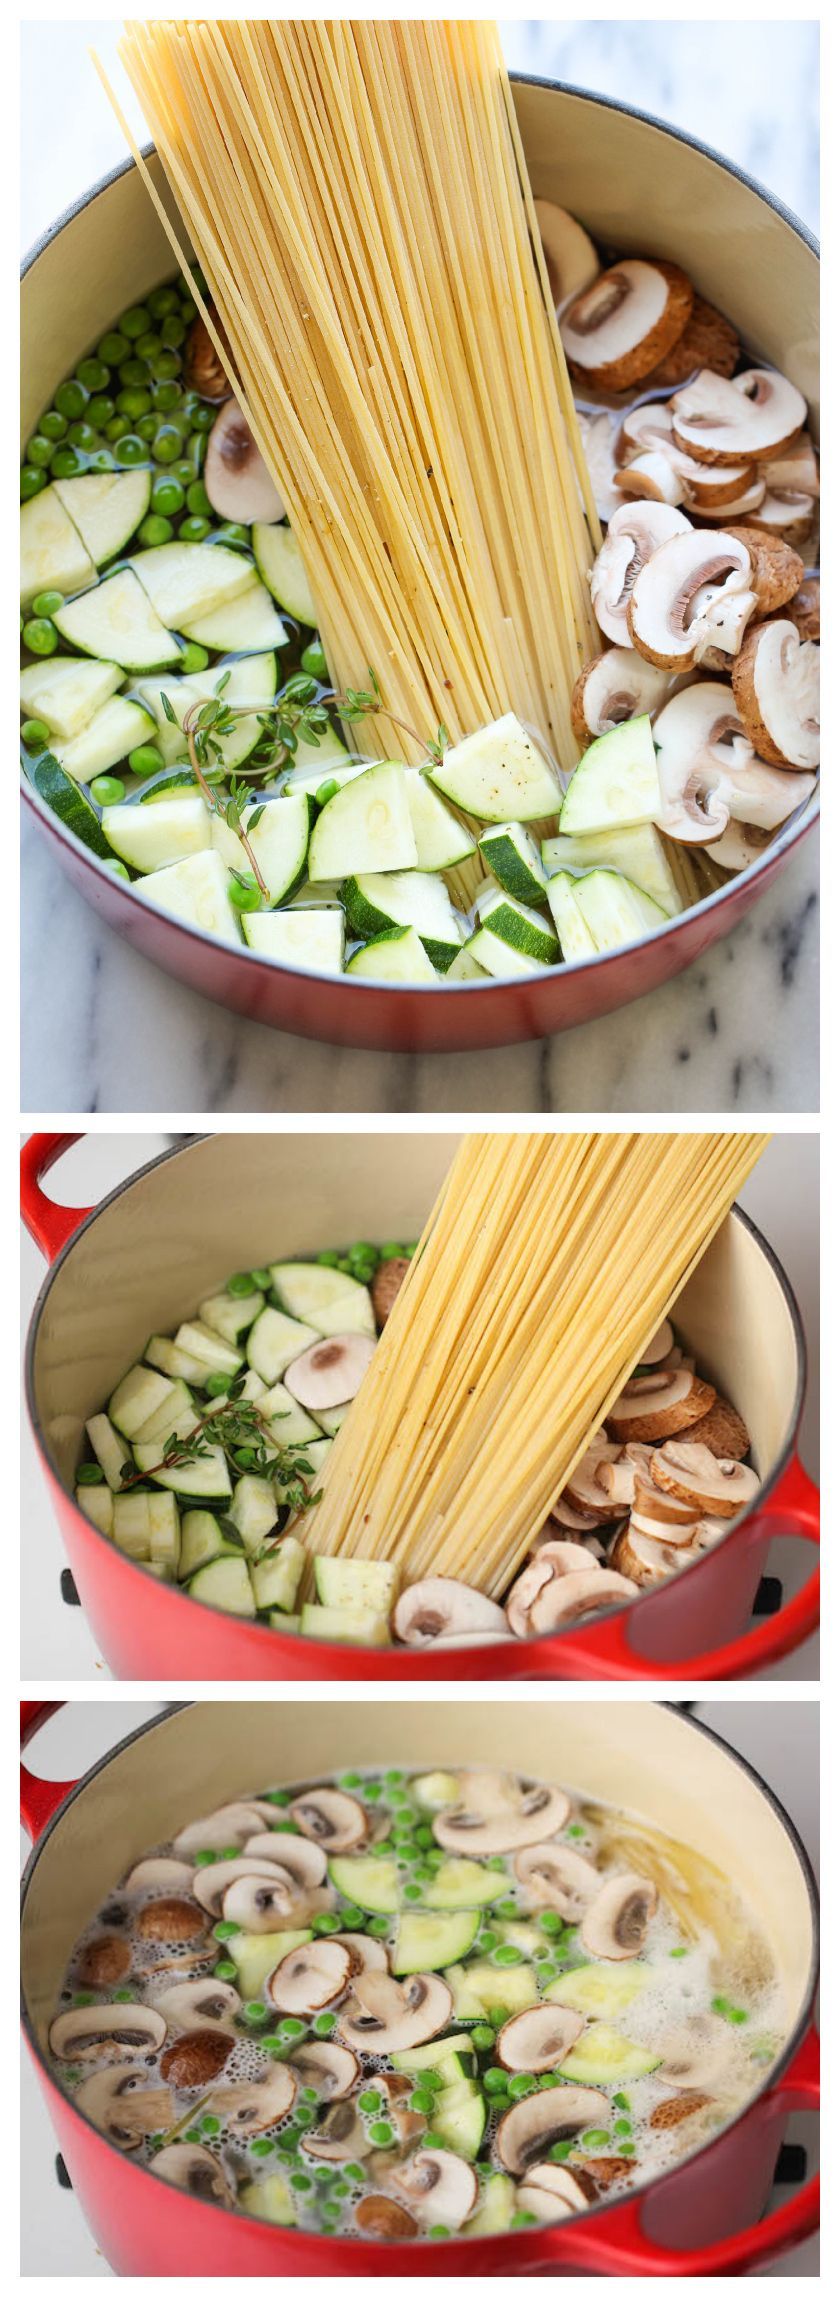 One Pot Zucchini Mushroom Pasta – A creamy, hearty pasta dish that you can make in just 20 min. Even the pasta gets cooked in the